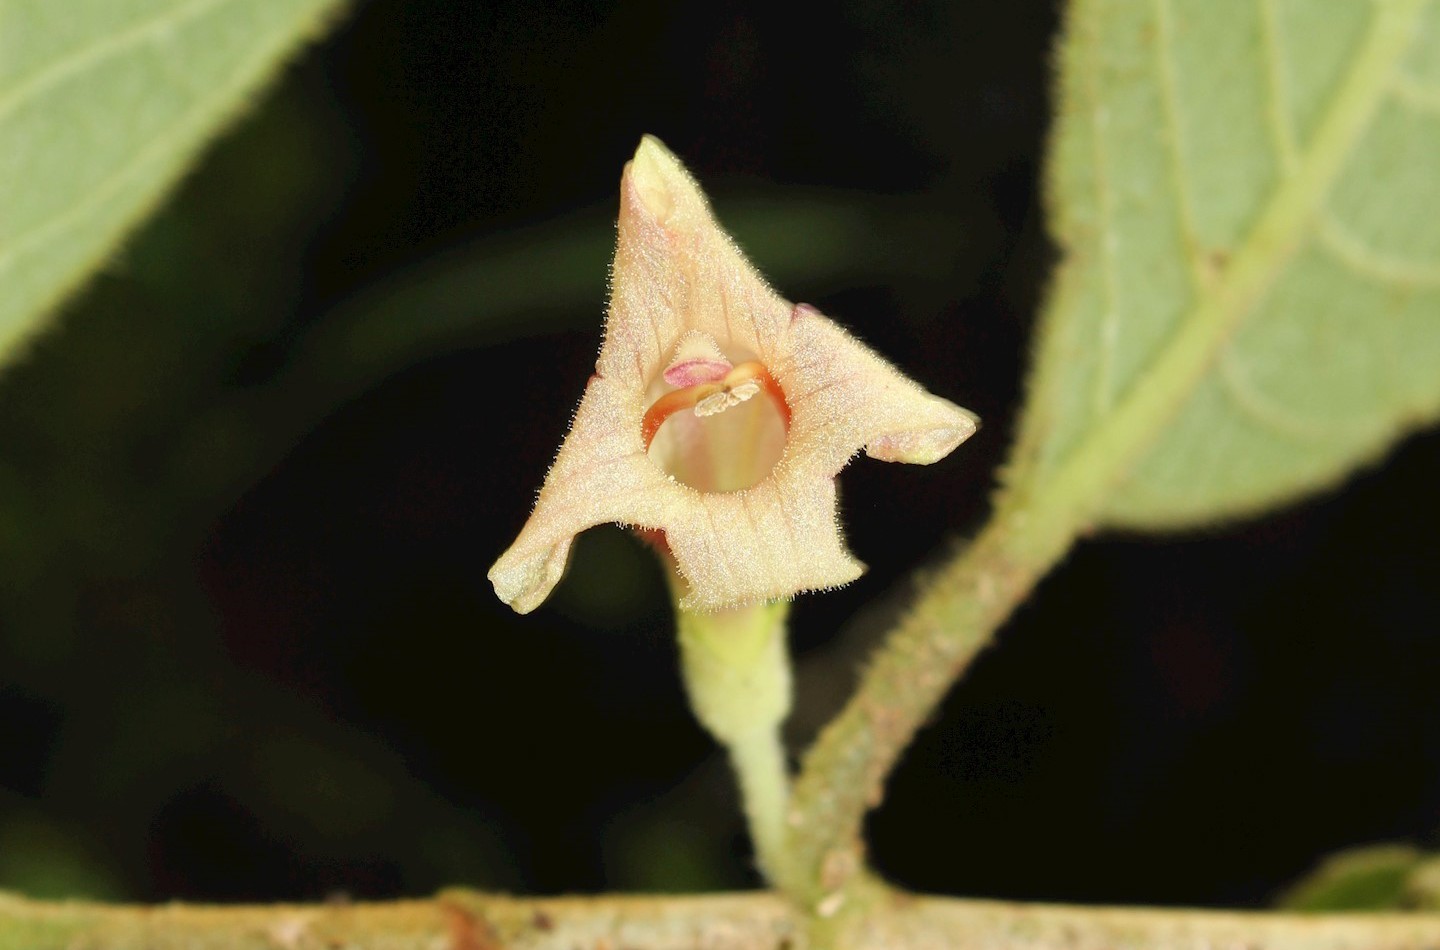 Pale yellow flower of Cyrtandra mollis from Sulawesi